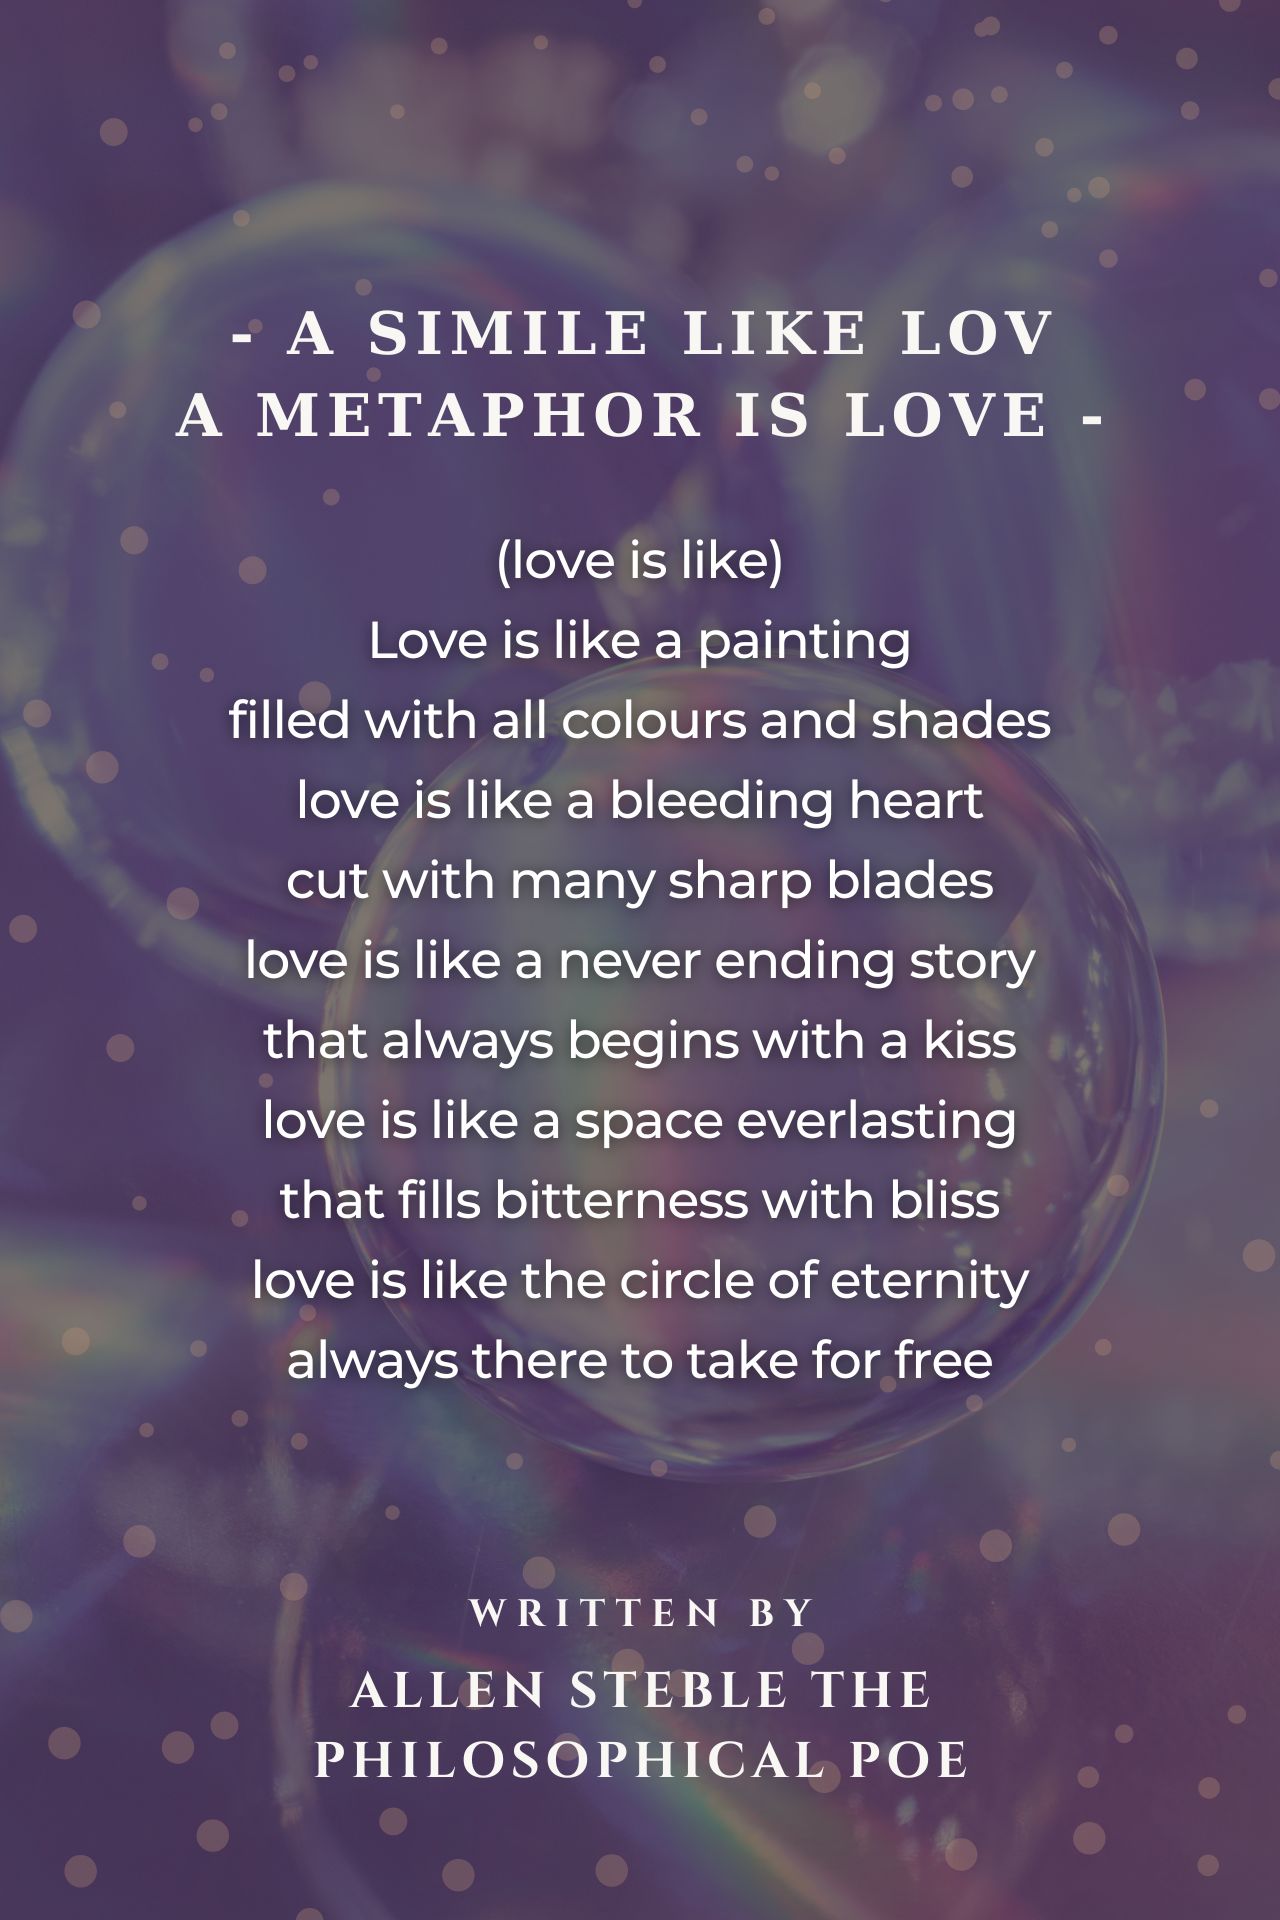 metaphor poems about love